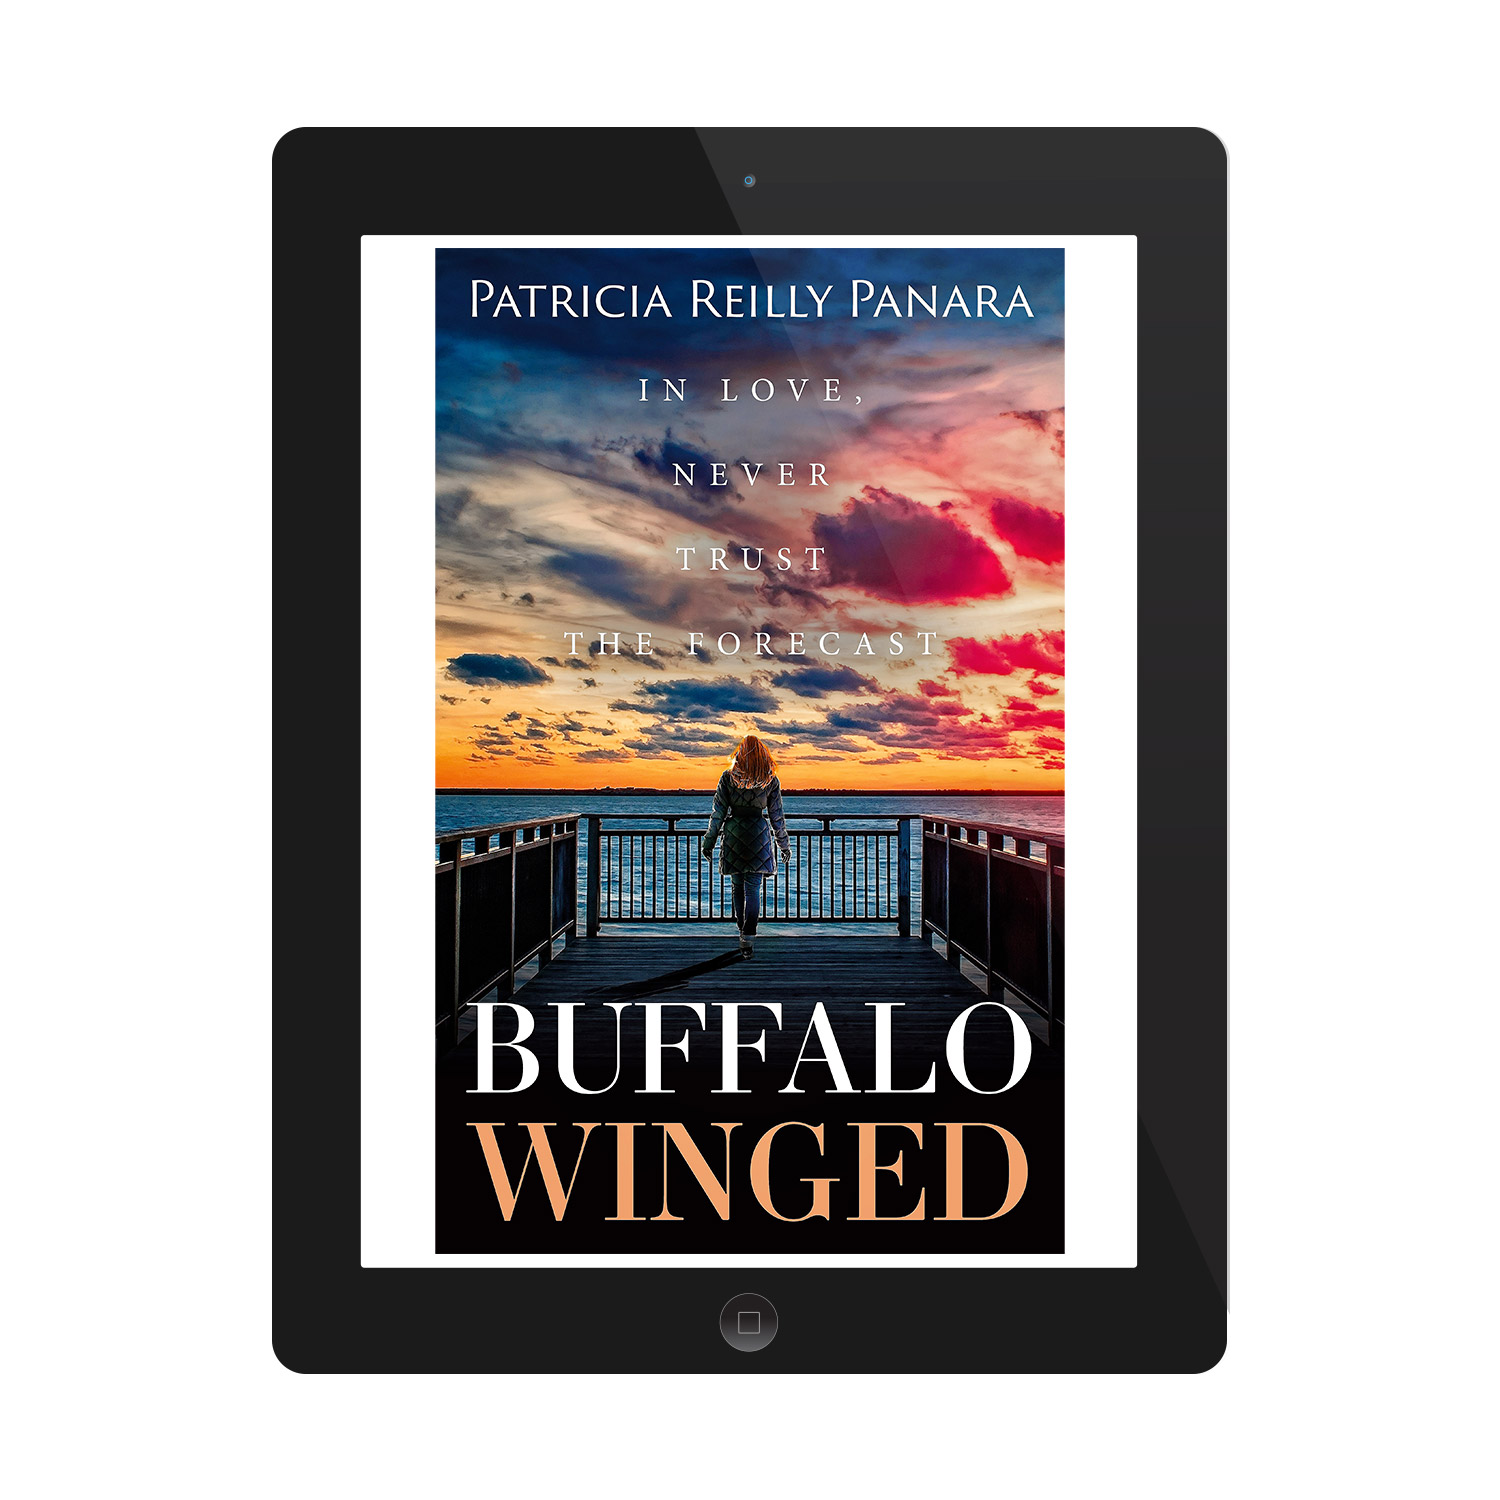 'Buffalo Winged' is a romantic novel, set in upstate New York. The author is Patricia Reilly Panara. The book cover and interior were designed by Mark Thomas, of coverness.com. To find out more about my book design services, please visit www.coverness.com.